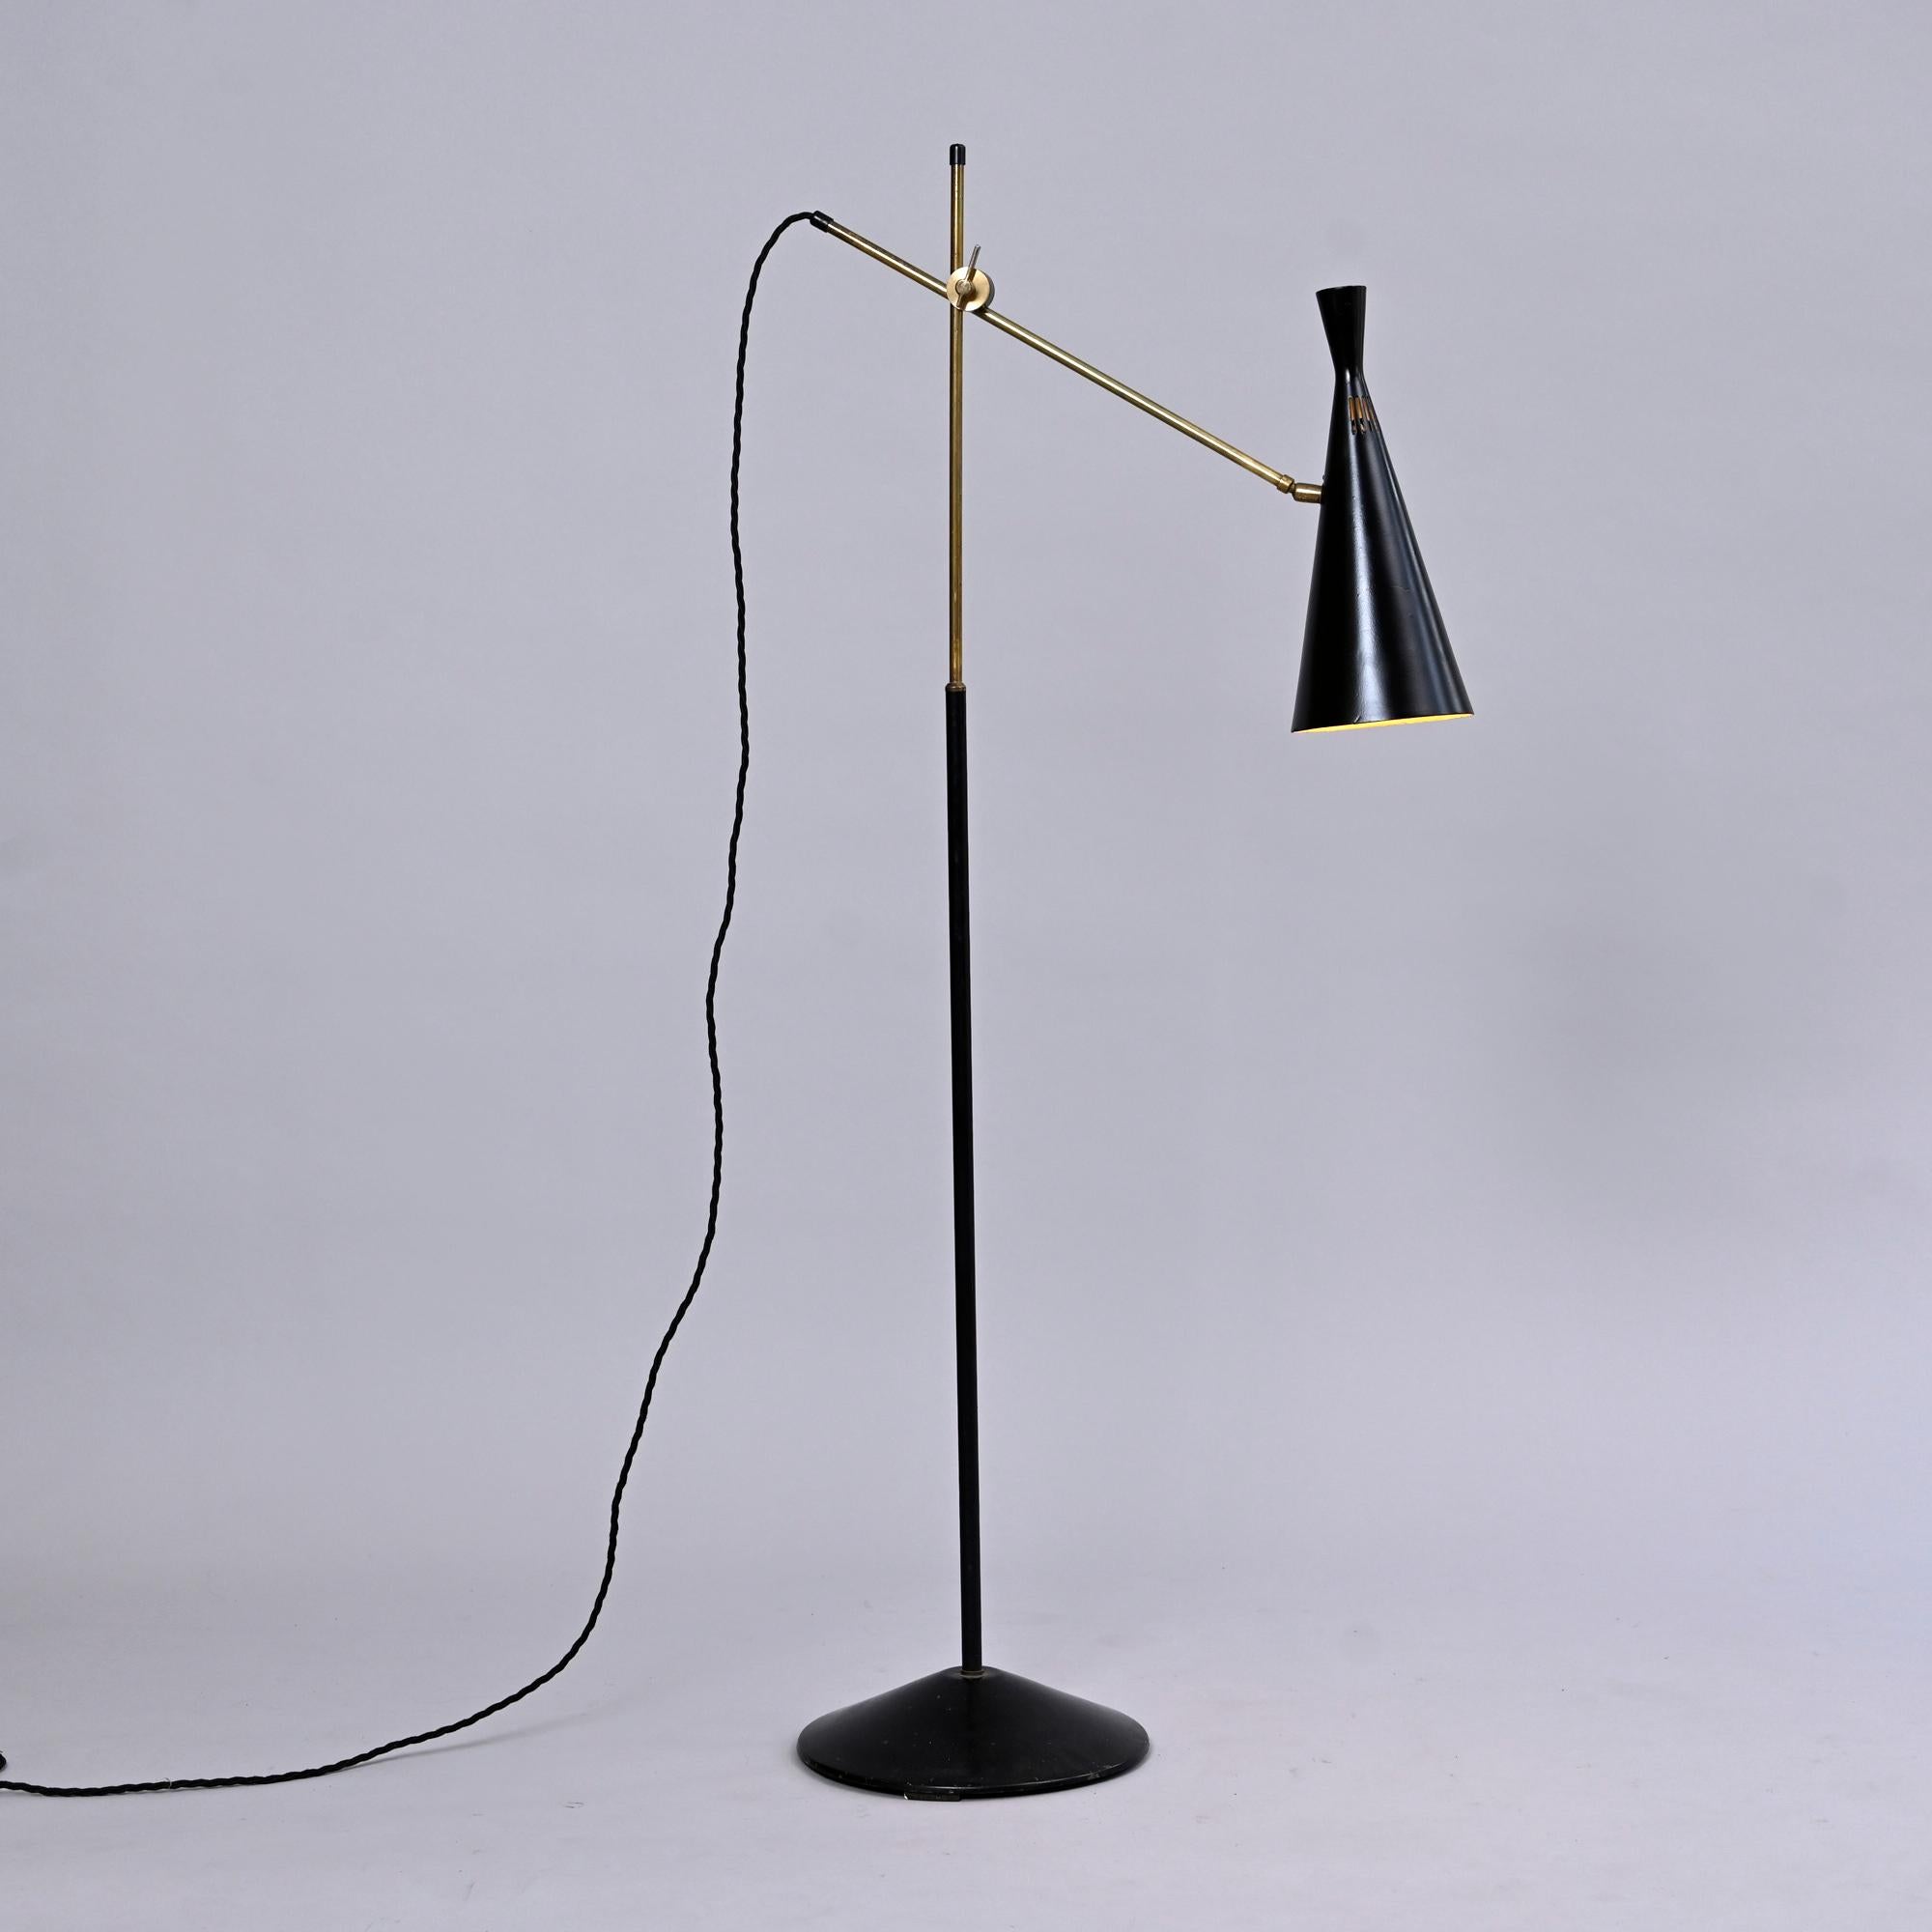 Mid-Century Modern Rare English Floor Lamp by Maclamp C1950 England For Sale